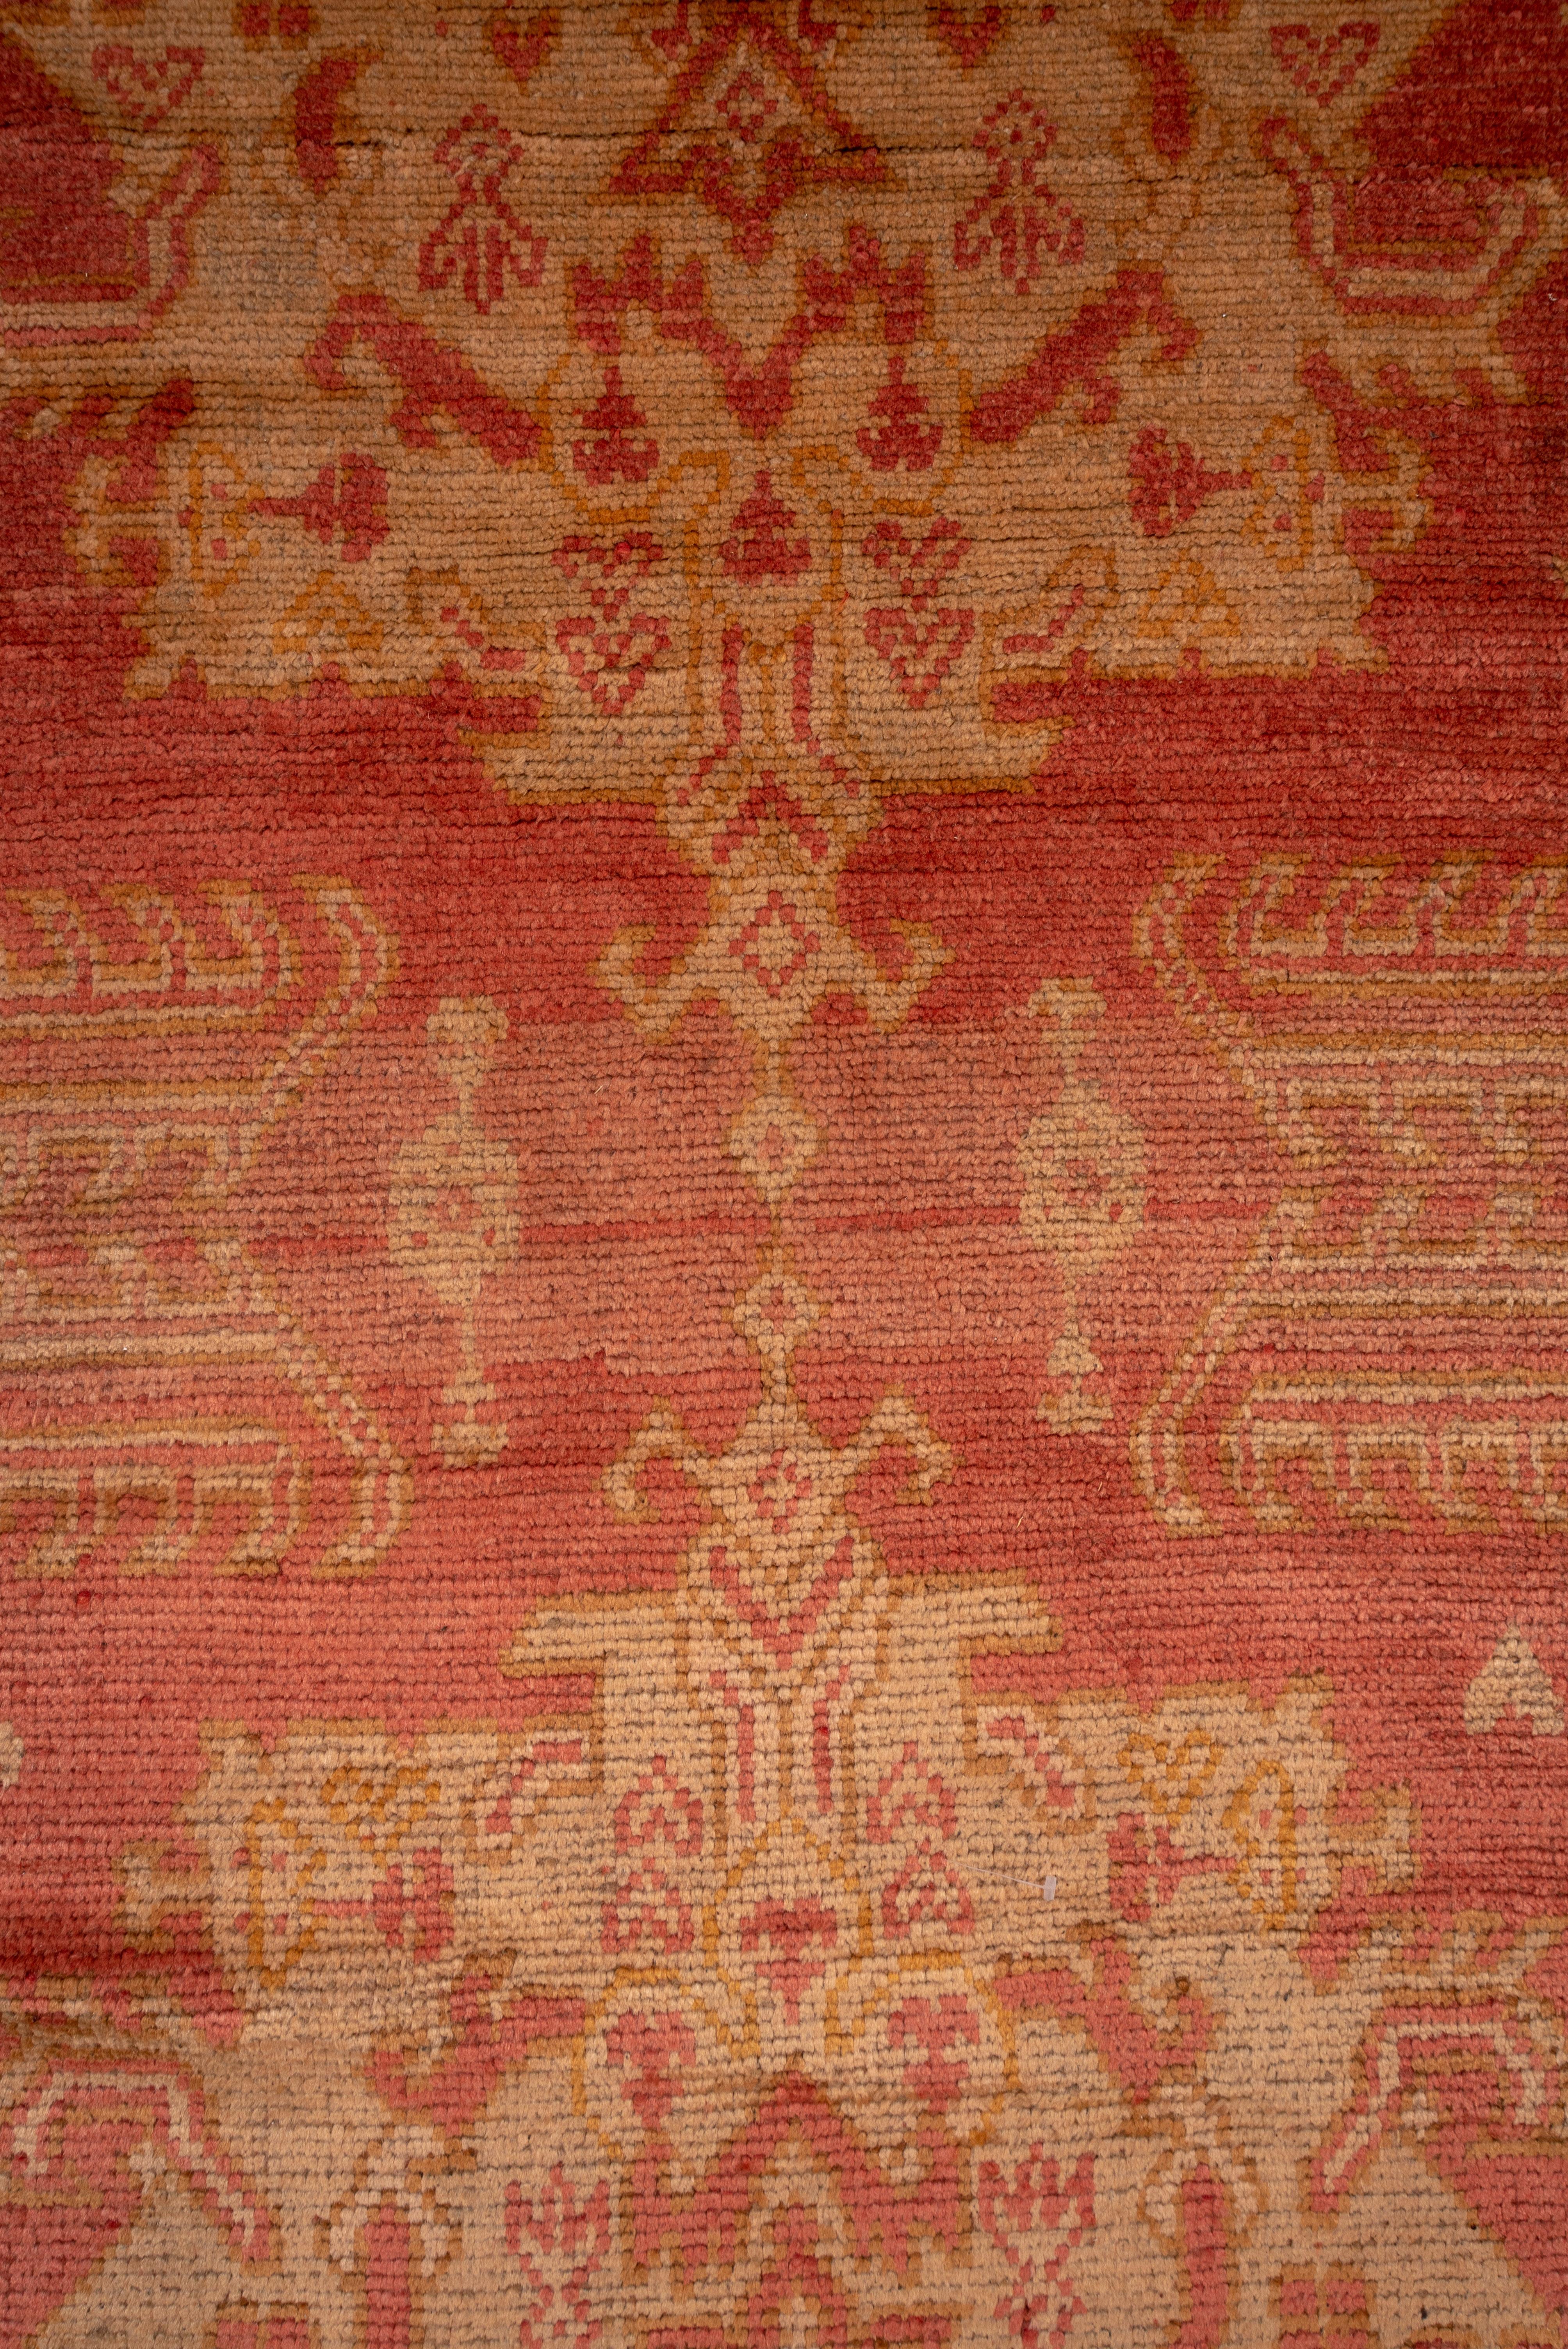 1910s Antique Turkish Oushak Area Rug, Light Red All-Over Field, Gold Borders For Sale 1